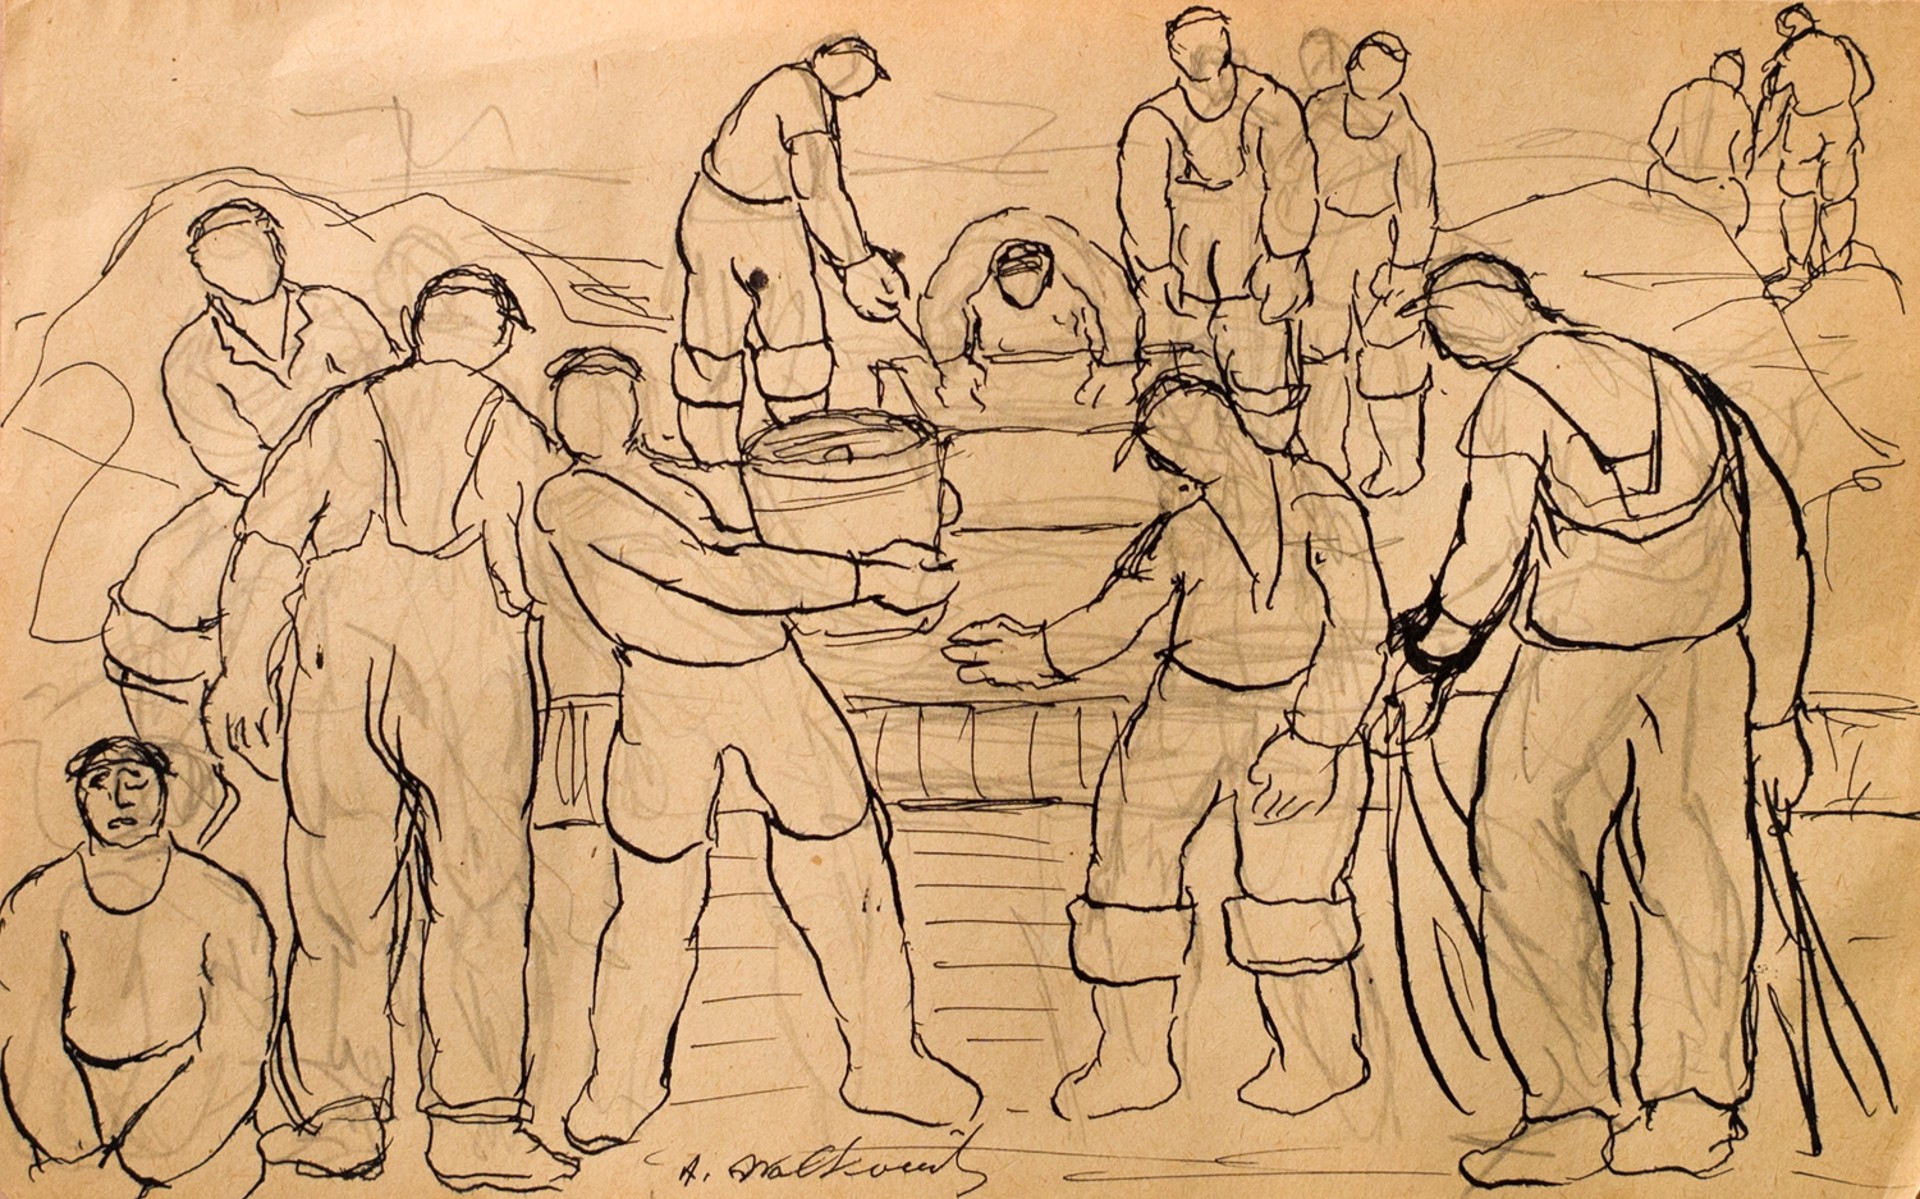 Fishermen and Clammers by Abraham Walkowitz